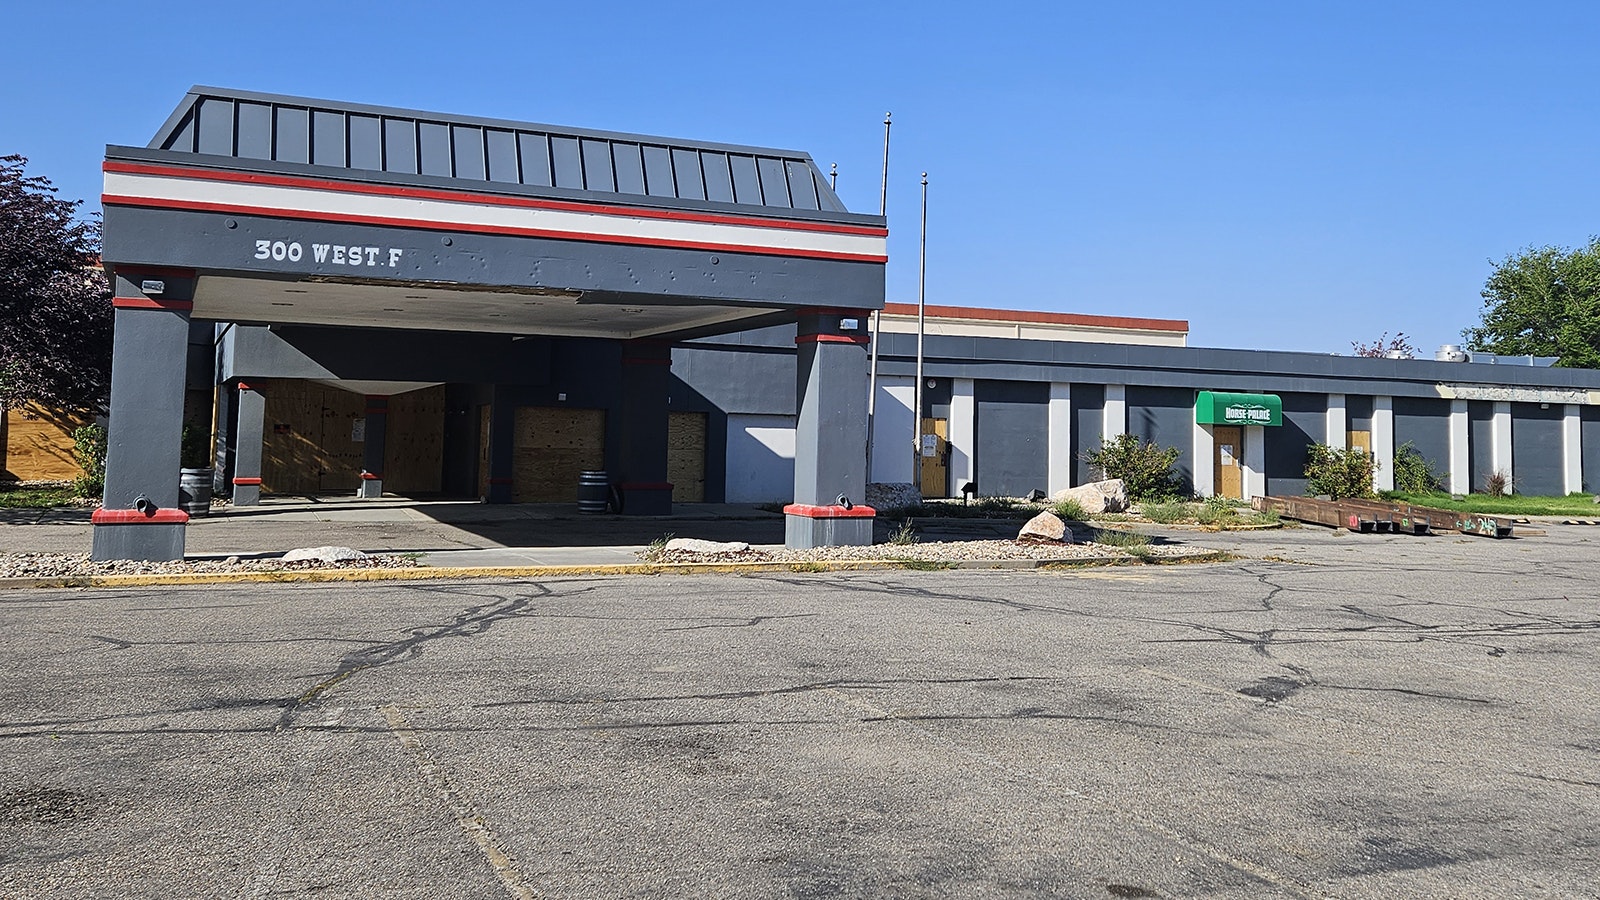 One place a growing Casper, Wyoming, homeless population has been camping out at is the vacant Econo Lodge motel.